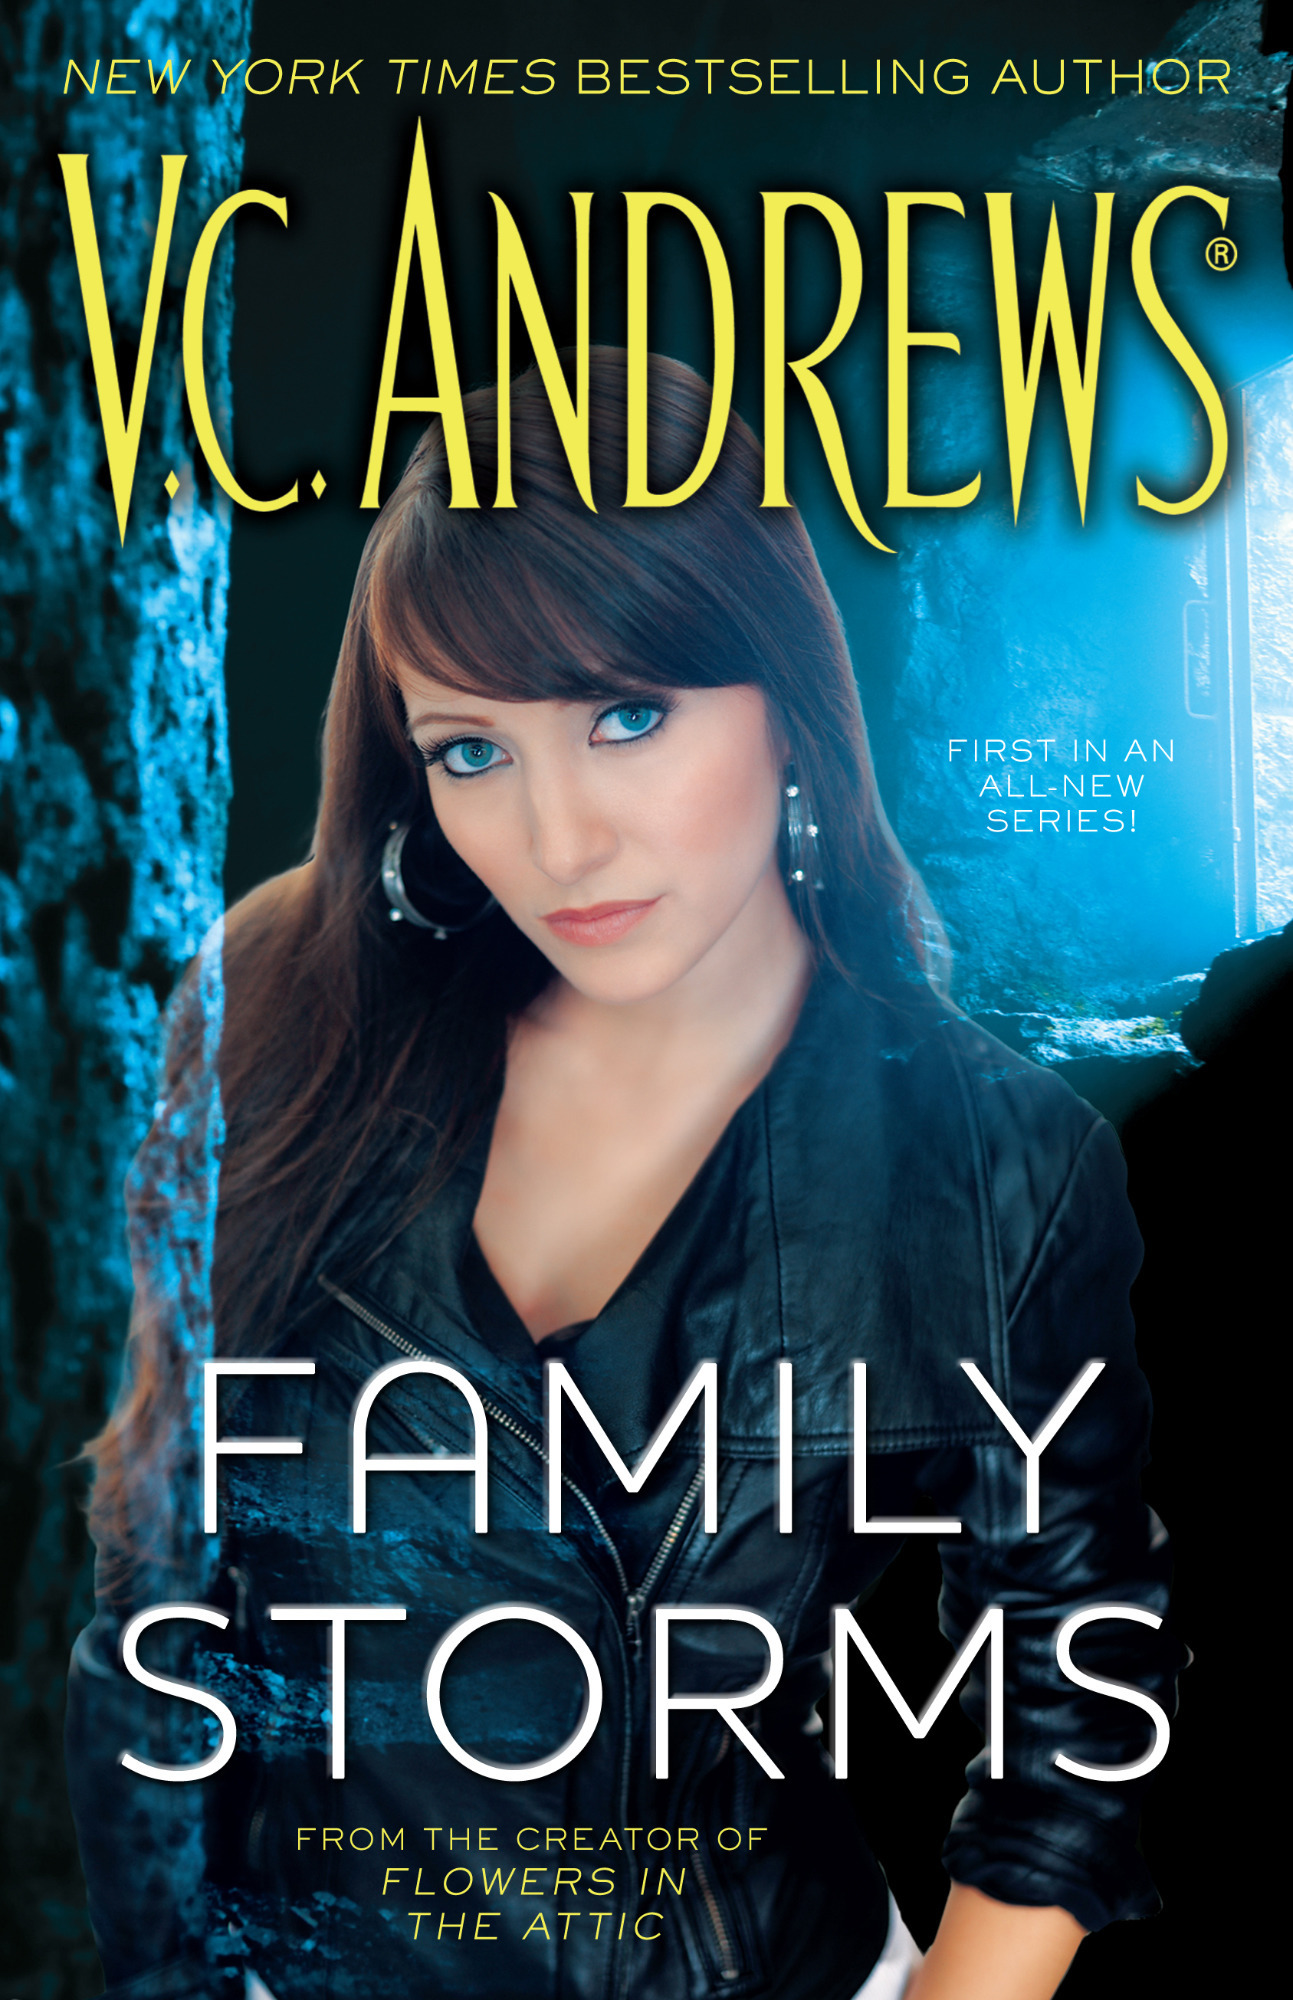 Family Storms by V.C. Andrews